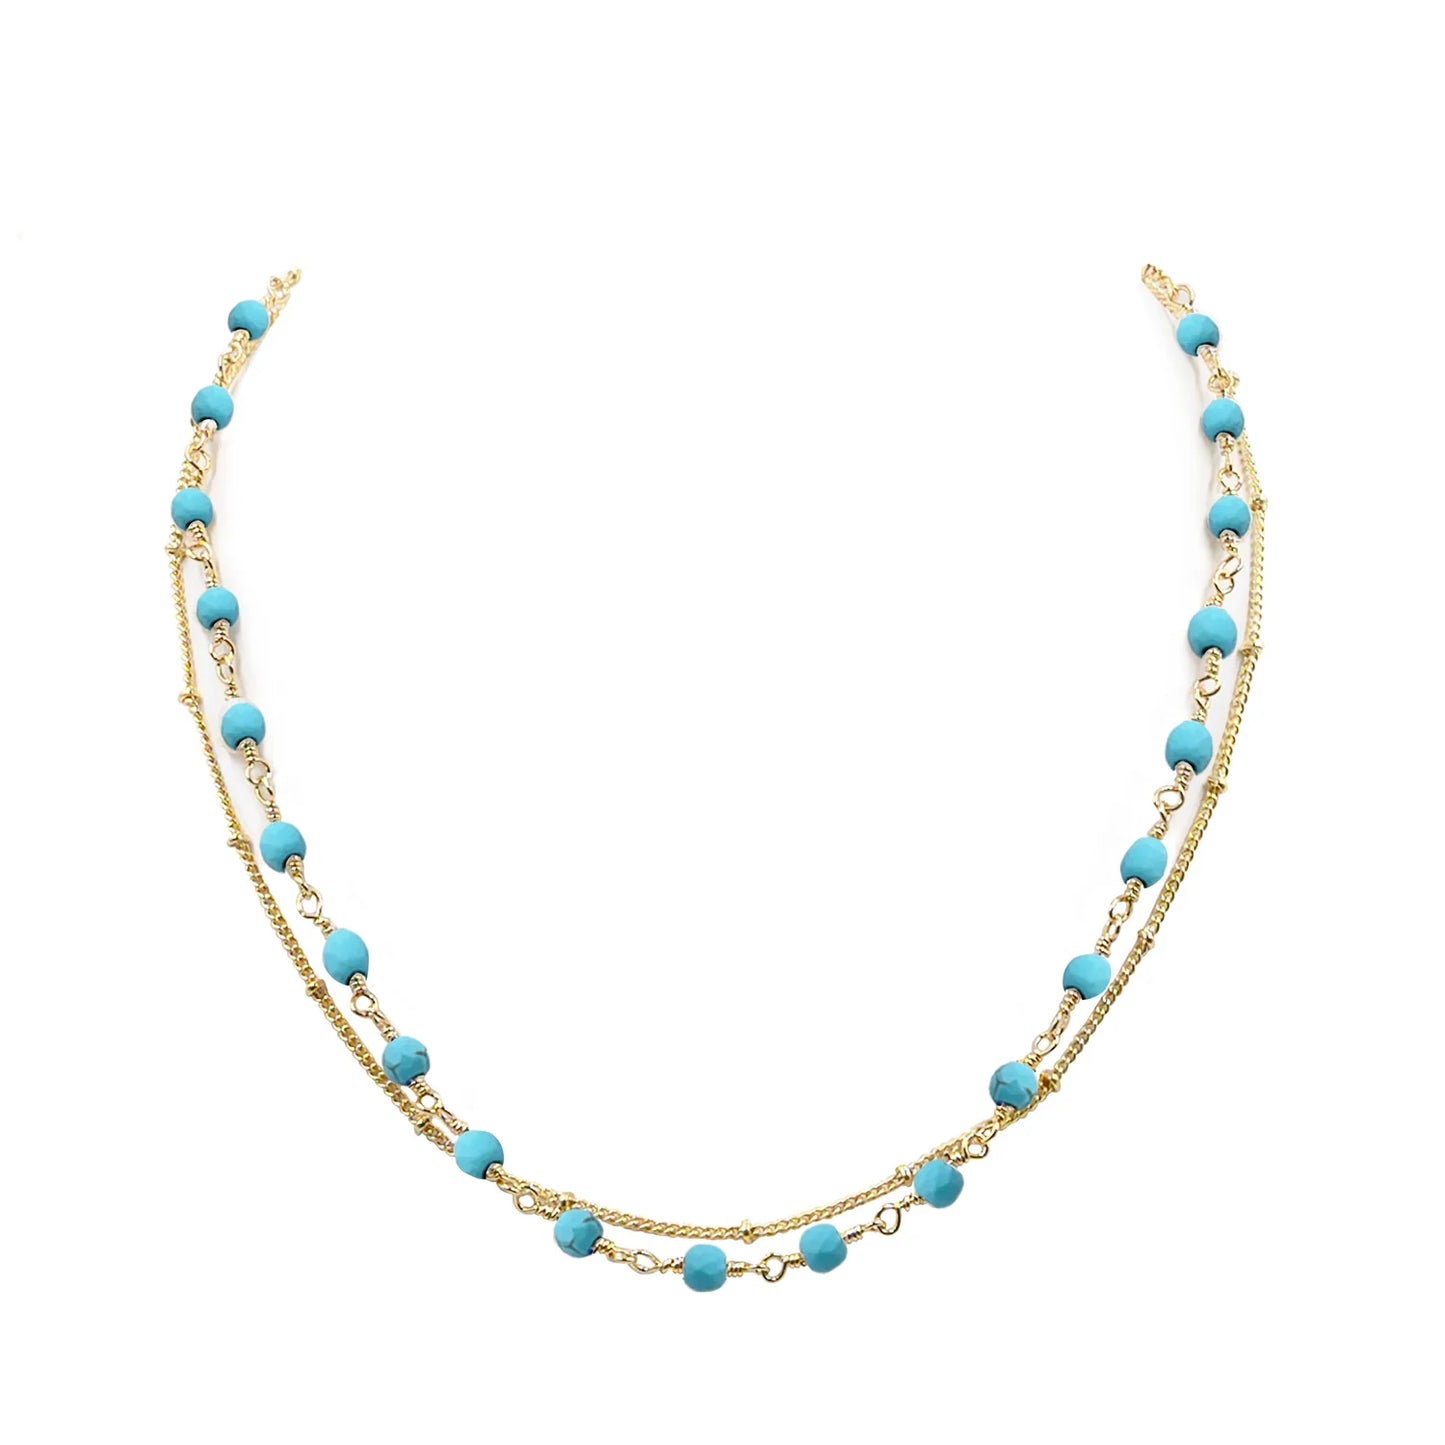 Kinsley Armelle-Vail Collection Beaded Necklace